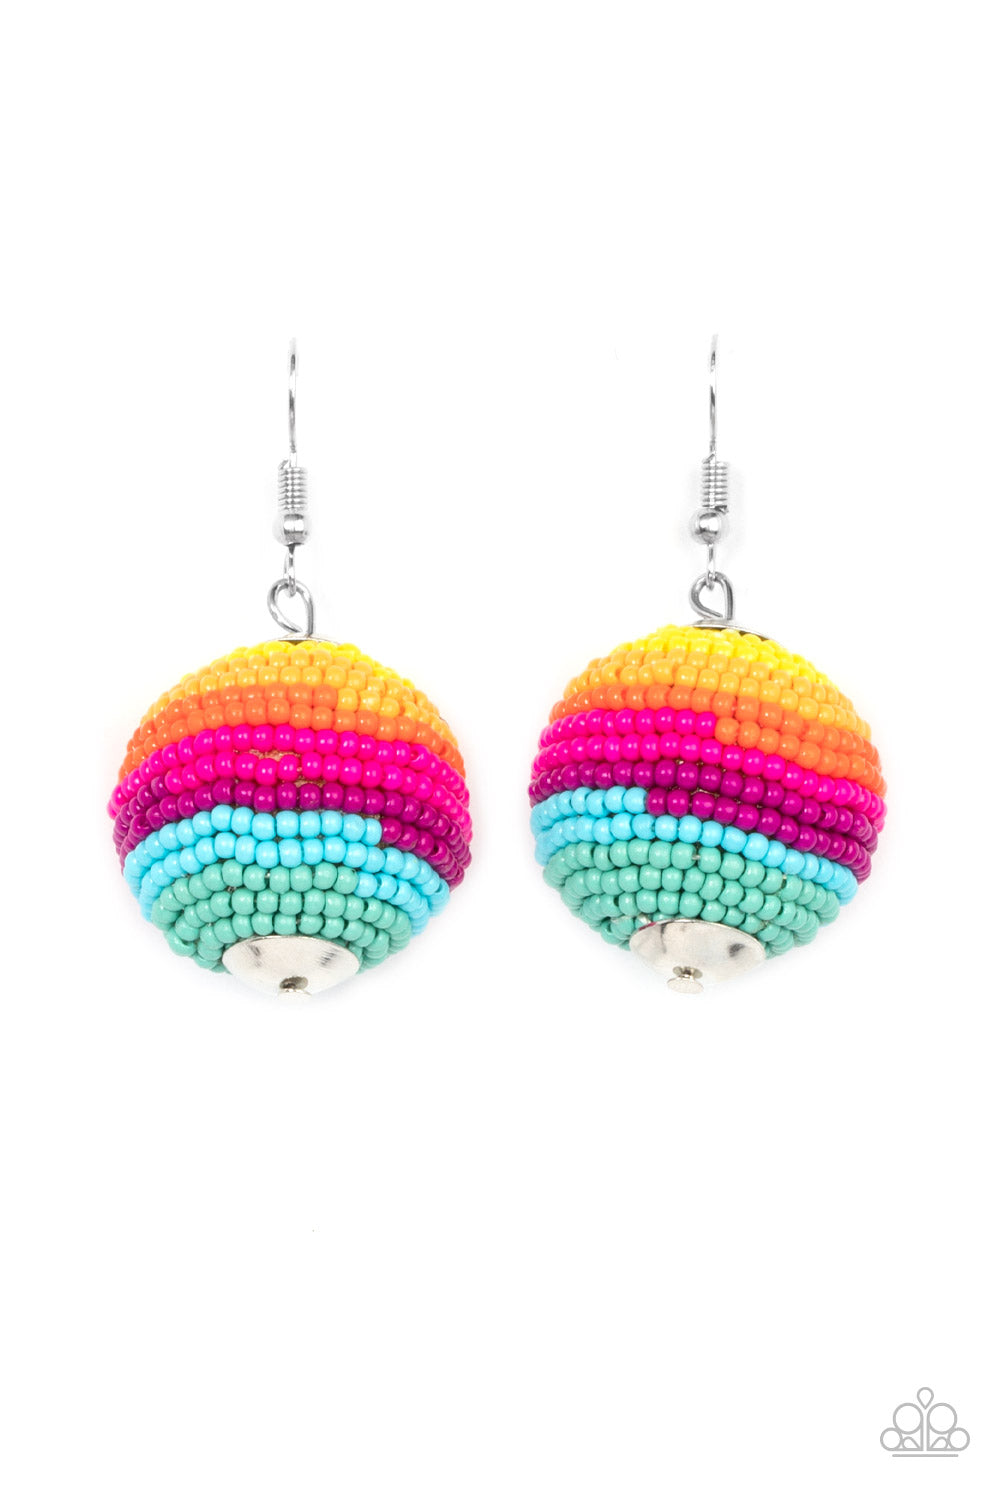 Zest Fest - Multi Seed Beads Earrings Paparazzi Accessories. Get Free Shipping. #P5SE-MTXX-147XX